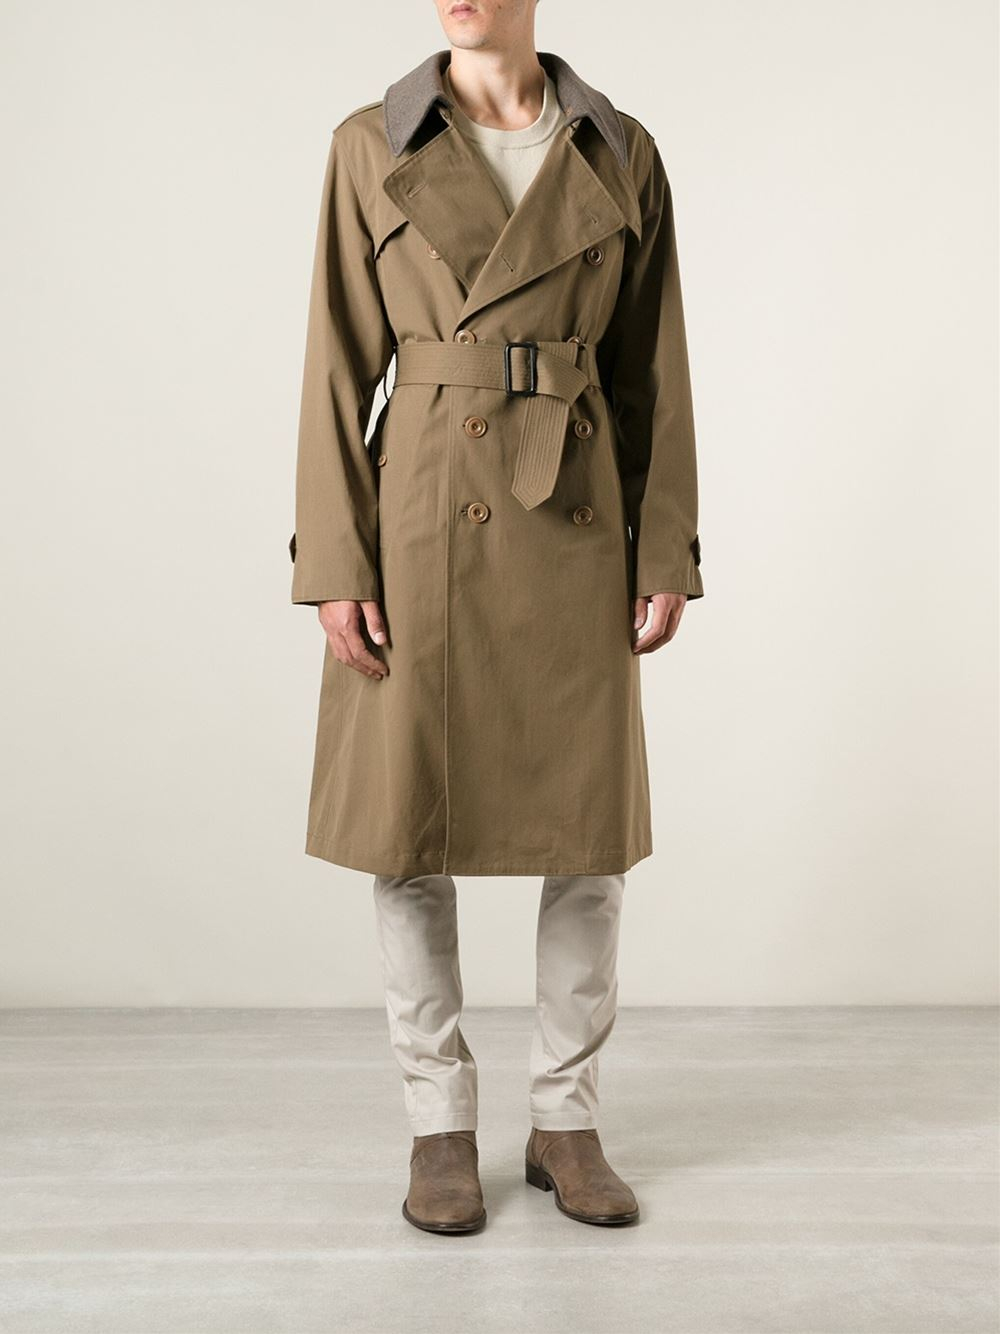 Christophe lemaire Contrasting Collar Trench Coat in Brown for Men | Lyst